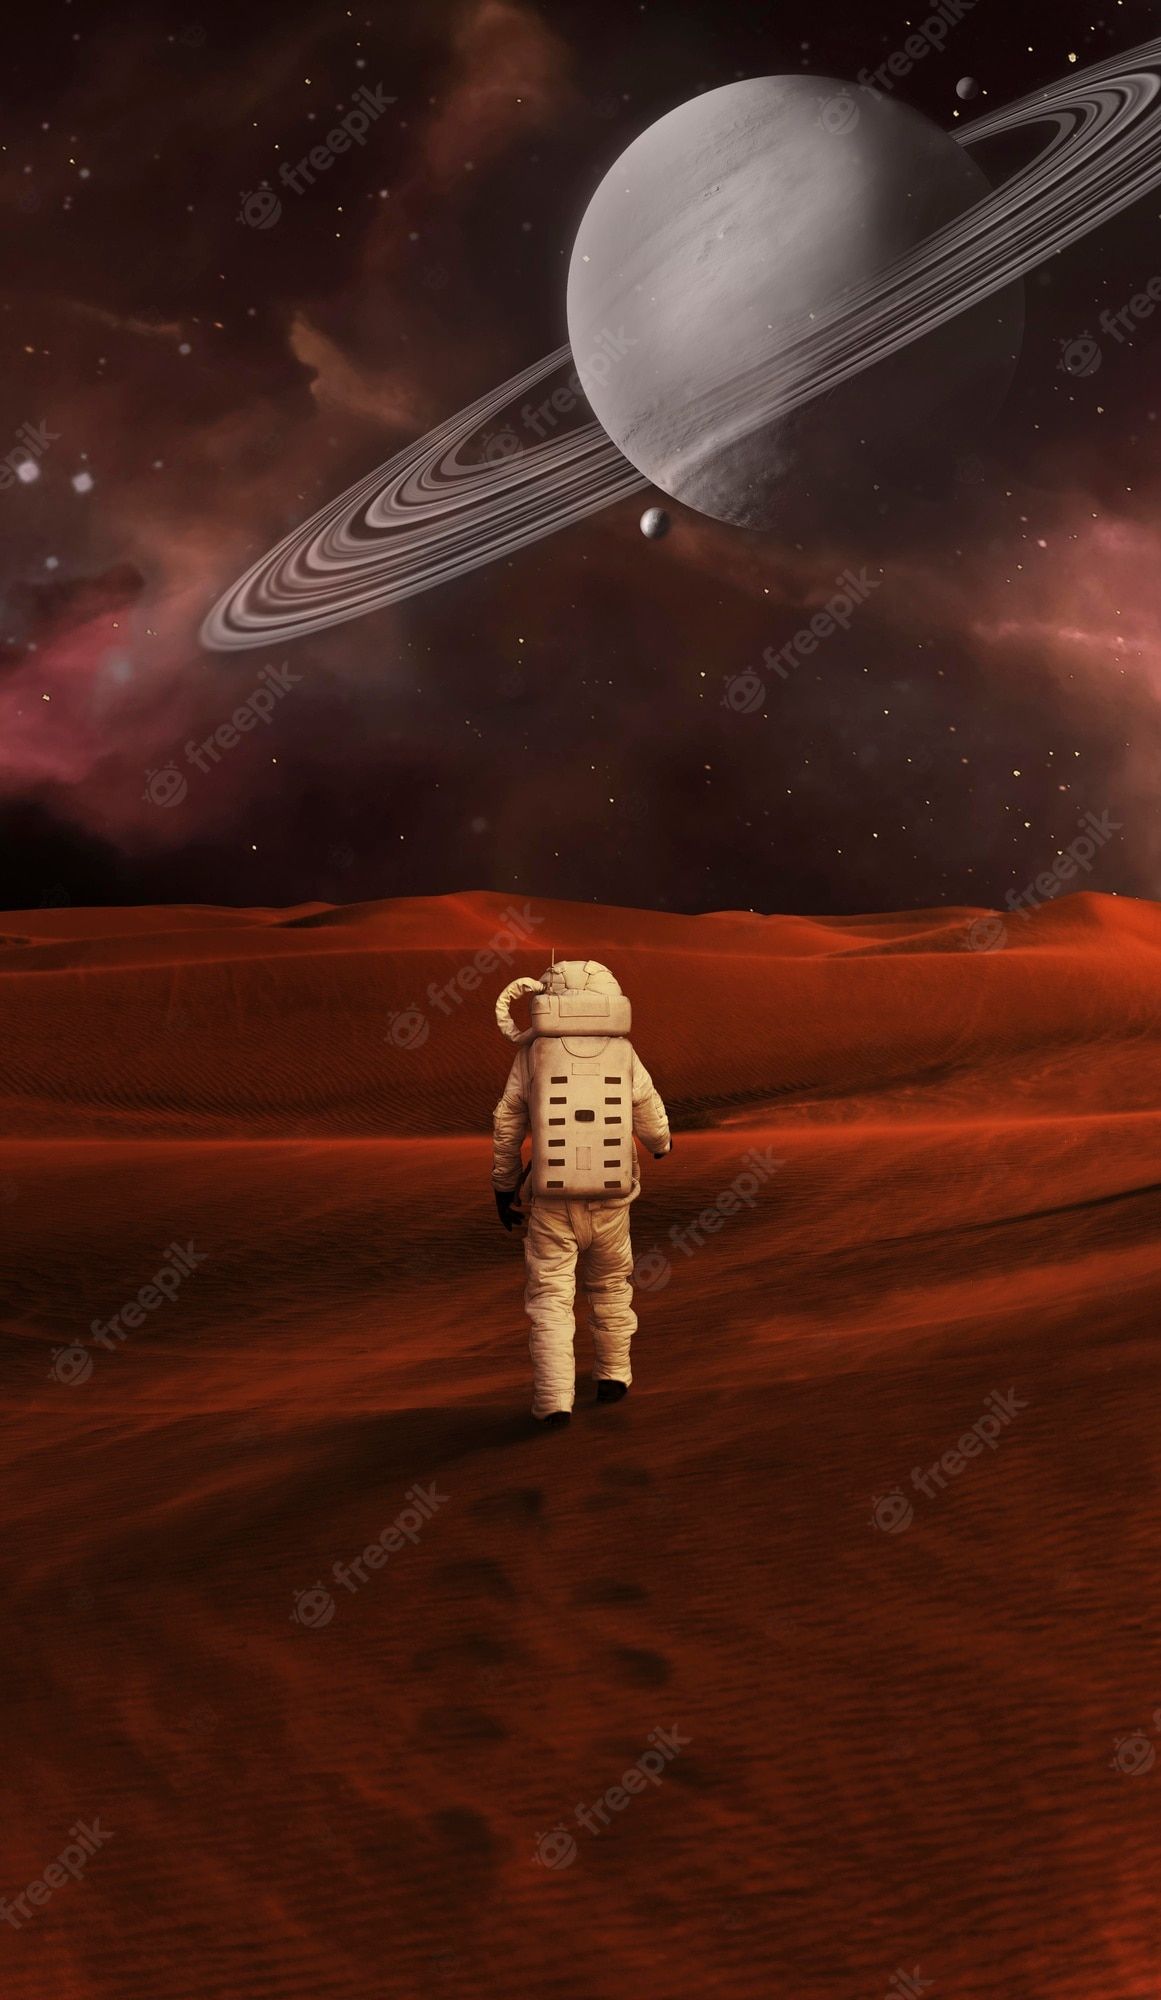 Free Photo. Journey to planet mars concept